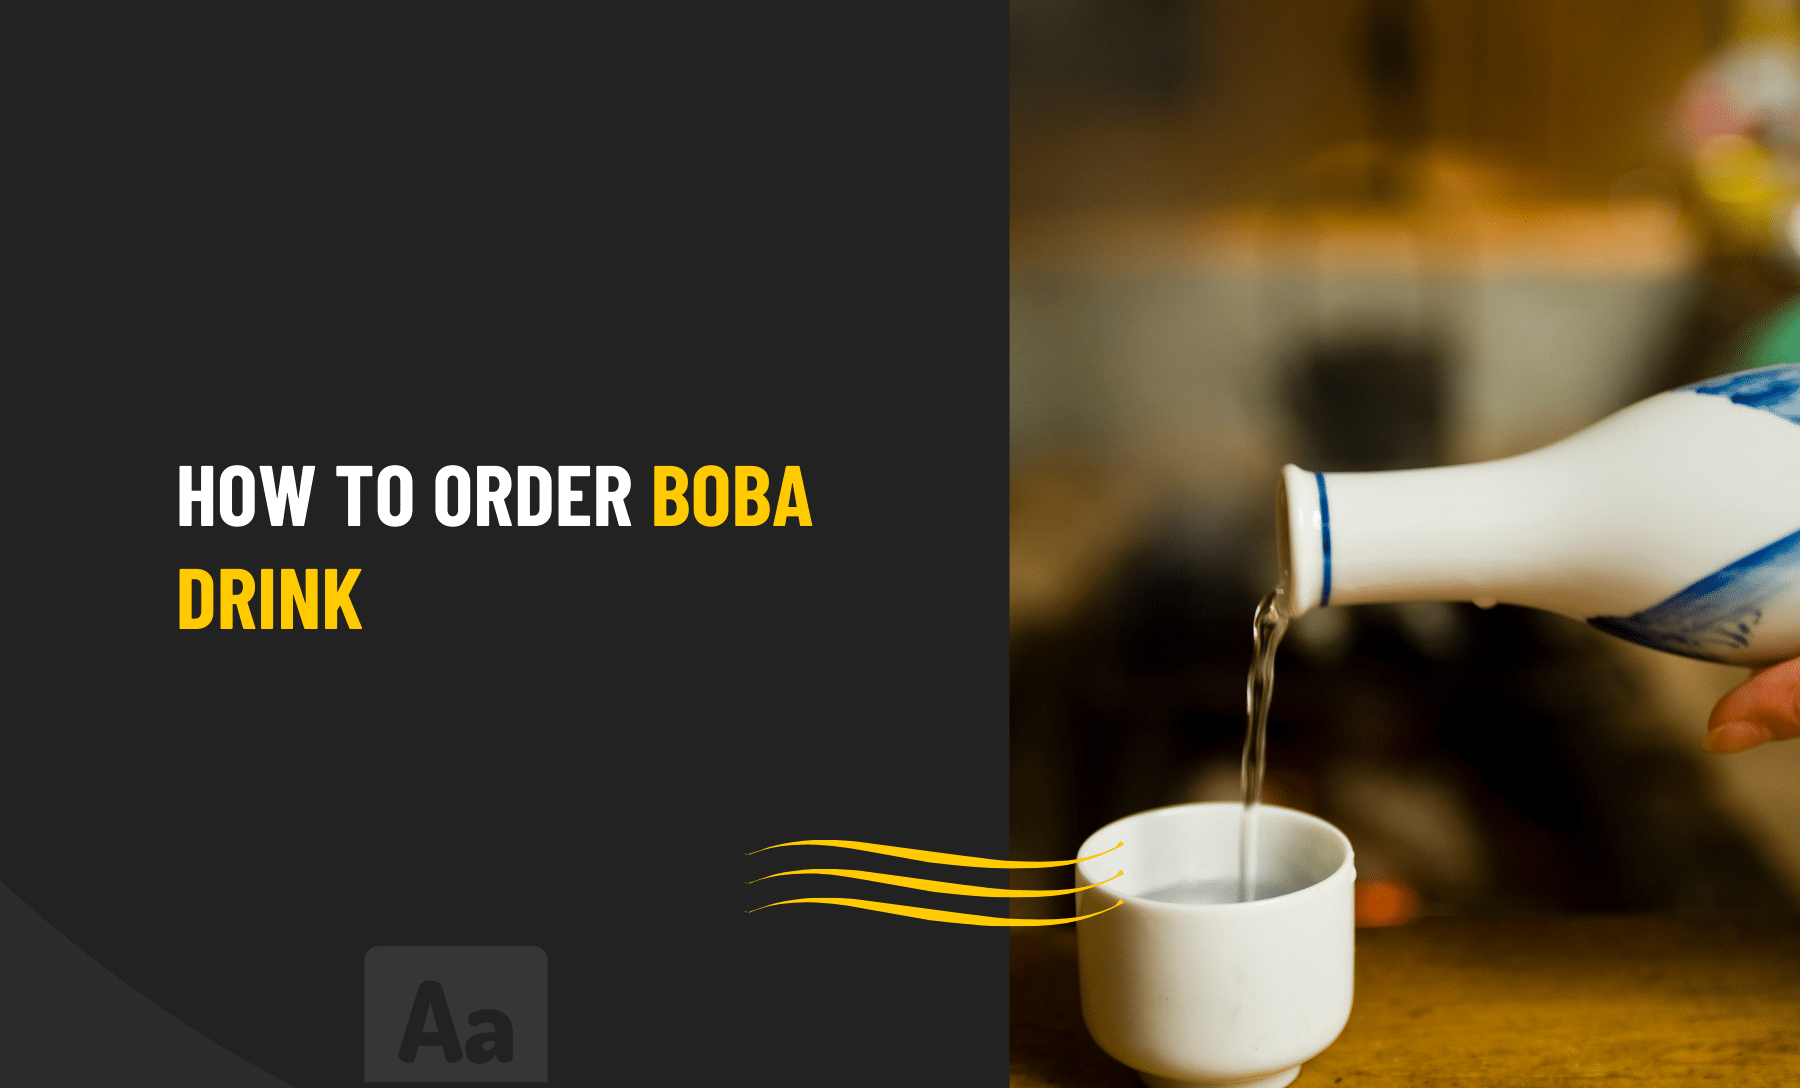 How to order boba drink